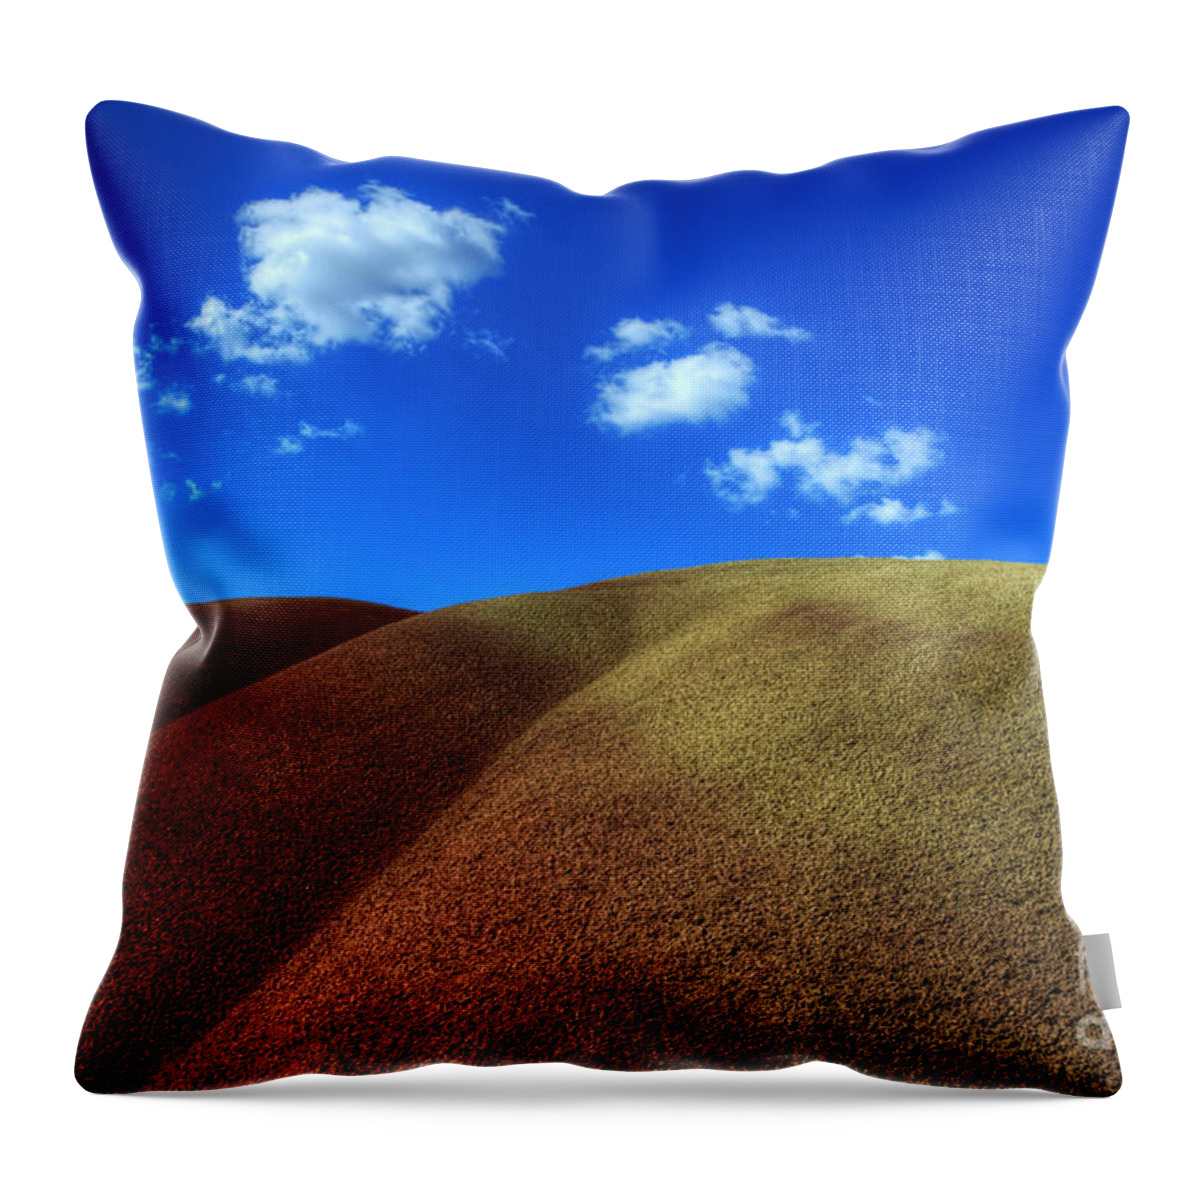 John Day Throw Pillow featuring the photograph Painted Hills Blue Sky 1 by Bob Christopher